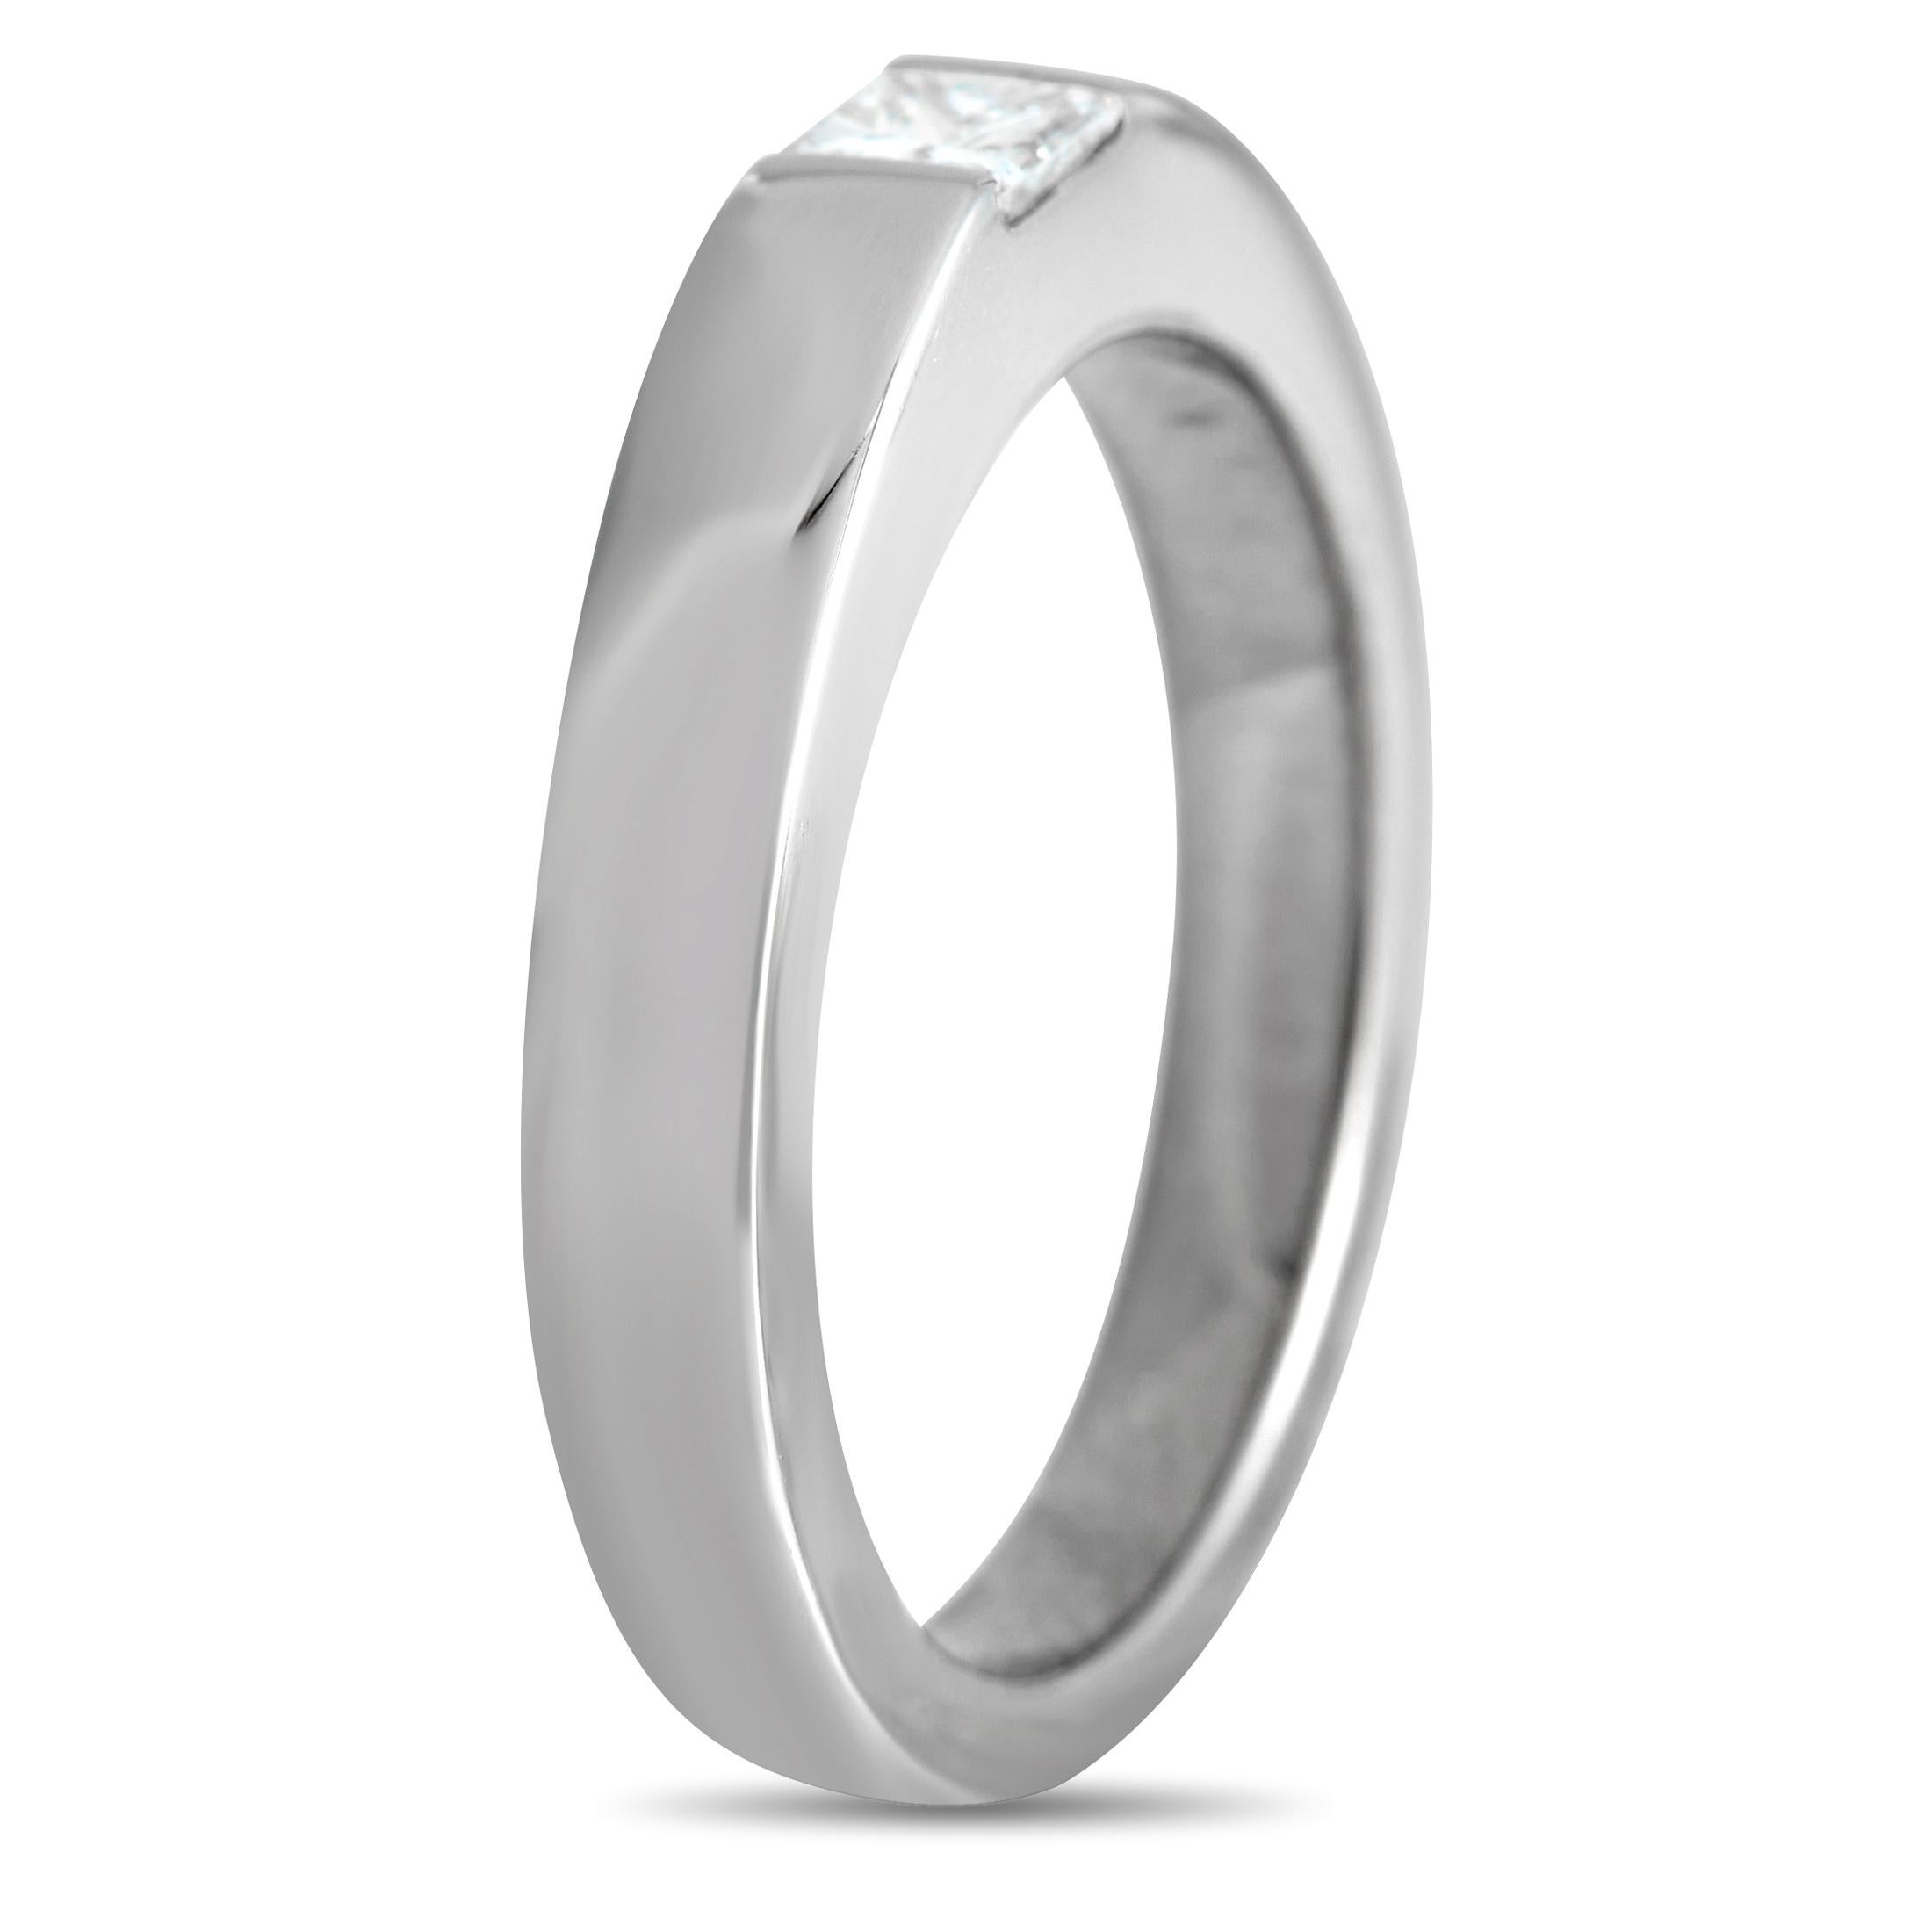 A single 0.25 carat square-cut Diamond sits at the center of this sophisticated Cartier ring. The sleek 18K White Gold setting features a band width and top height both measuring 3mm.\r\nThis jewelry piece is offered in estate condition and includes